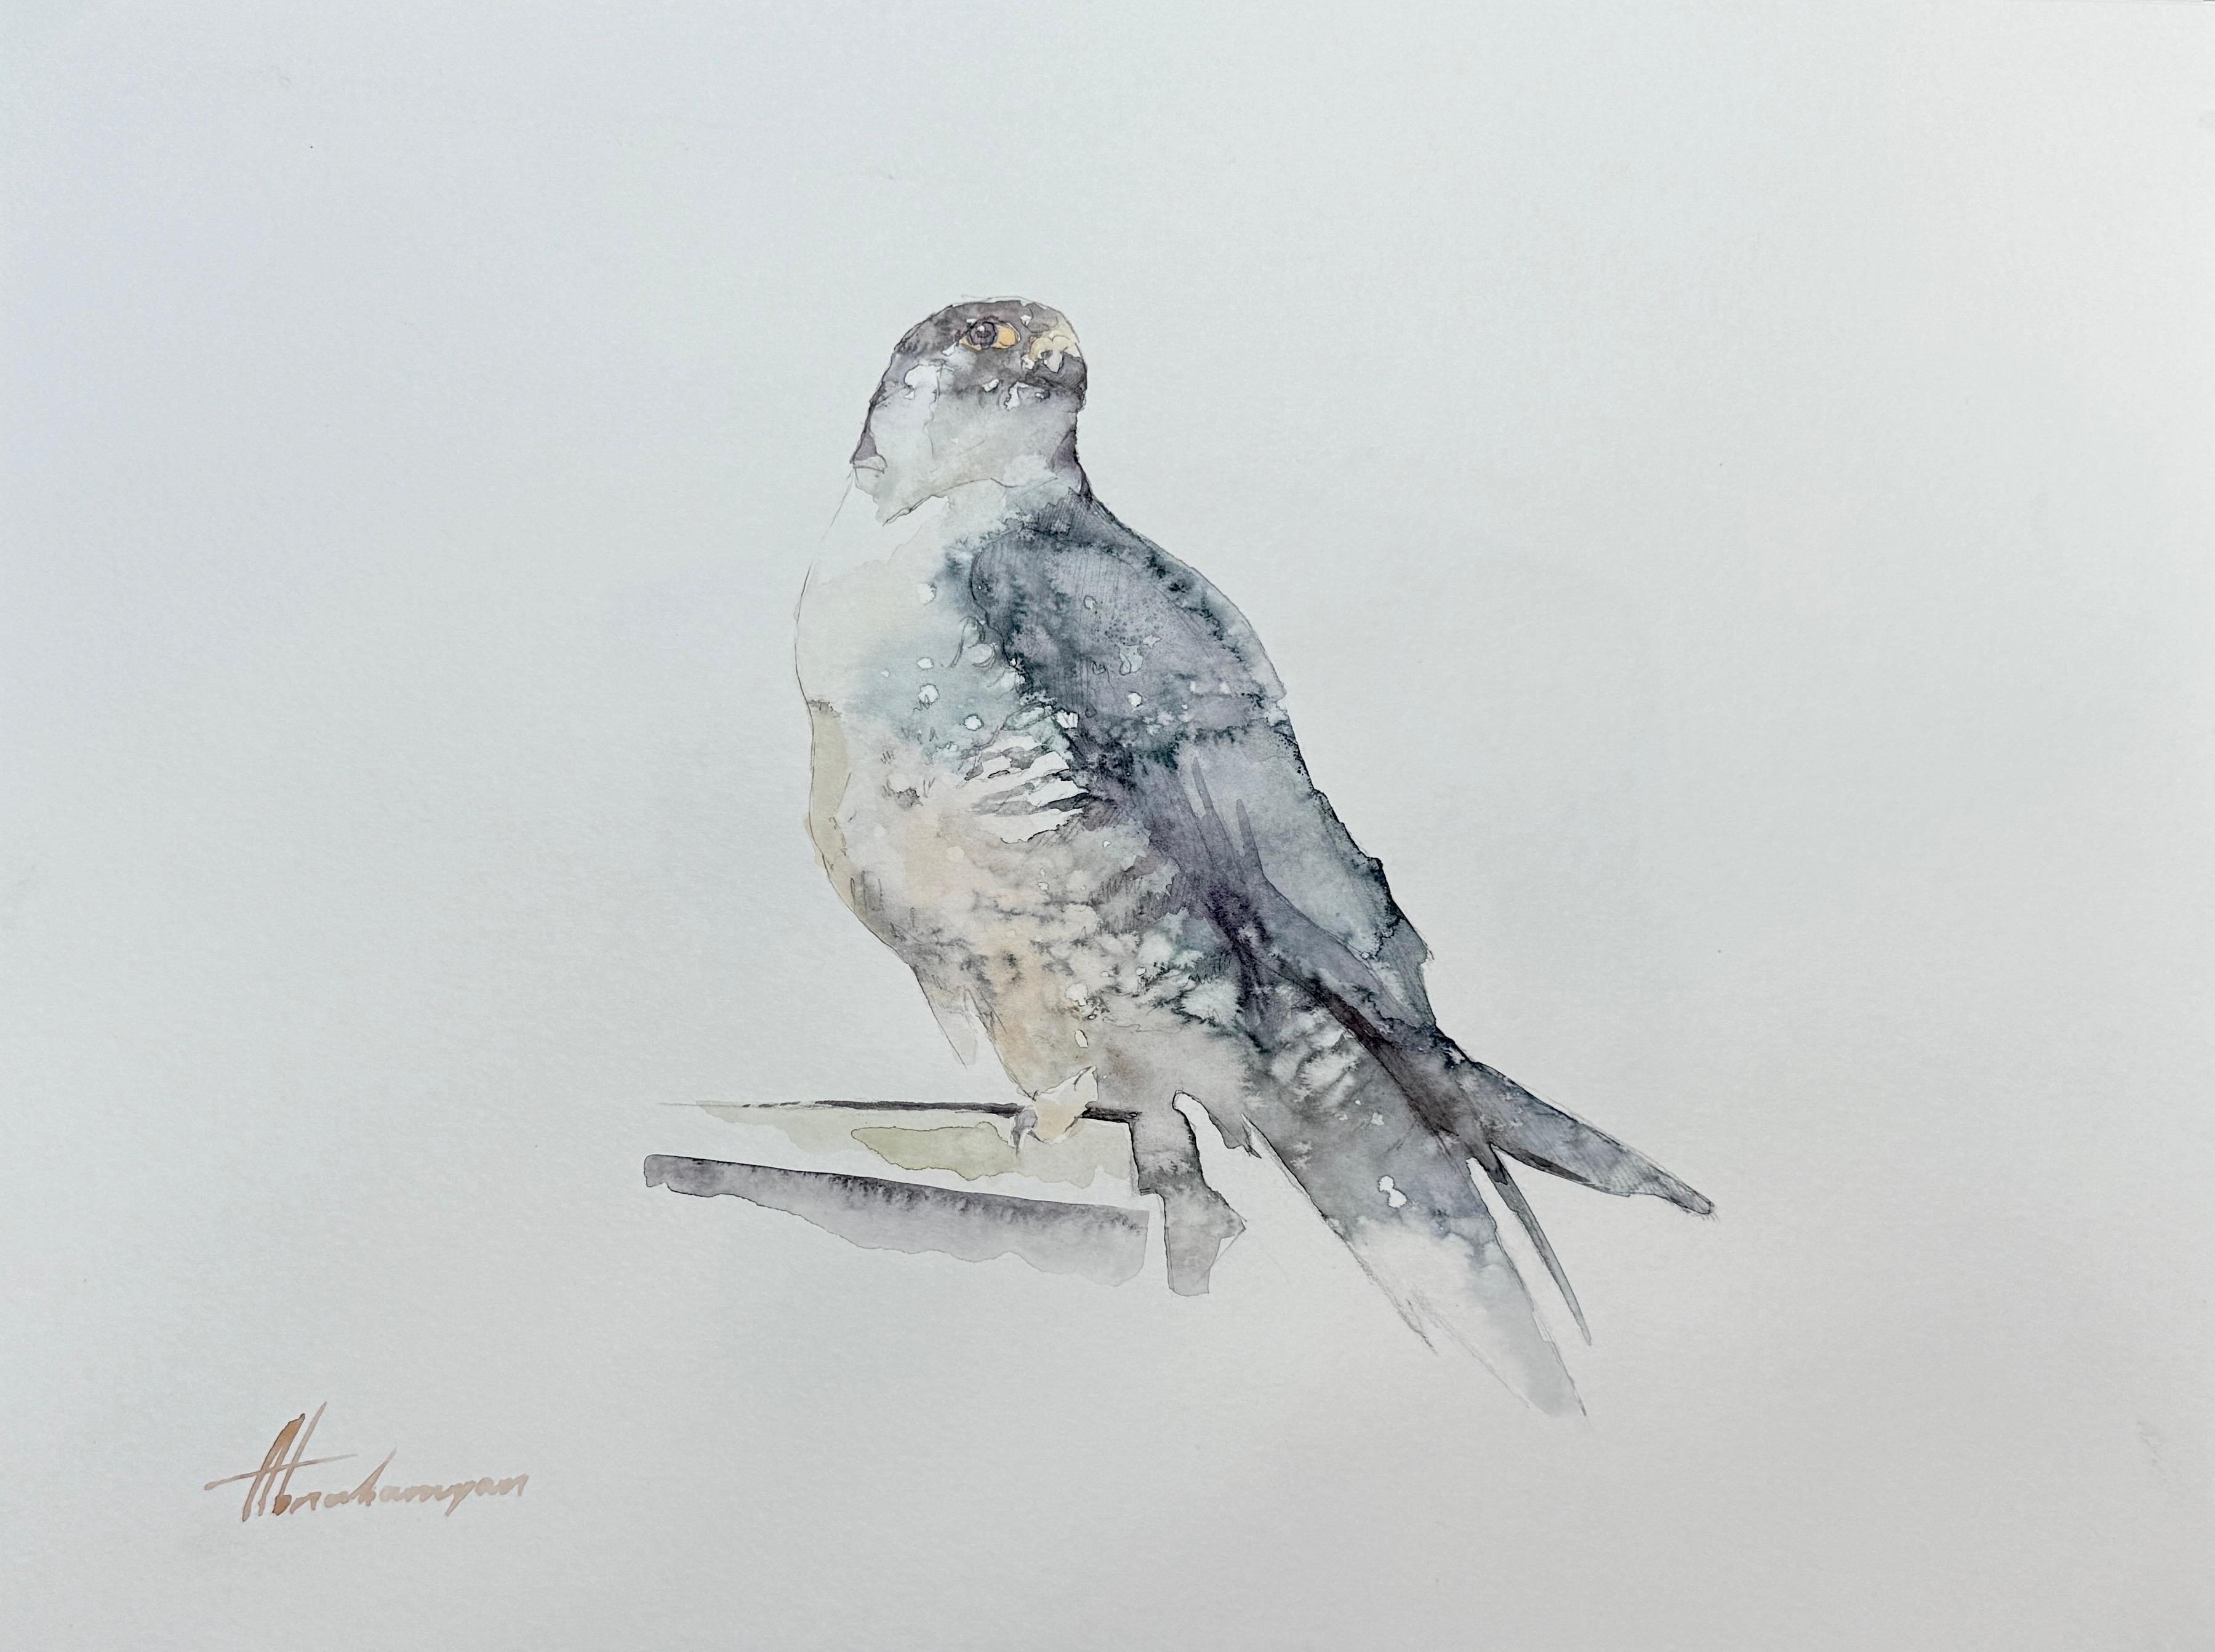 Artyom Abrahamyan Animal Art - Falcon, Bird, Watercolor on Paper, Handmade Painting, One of a Kind